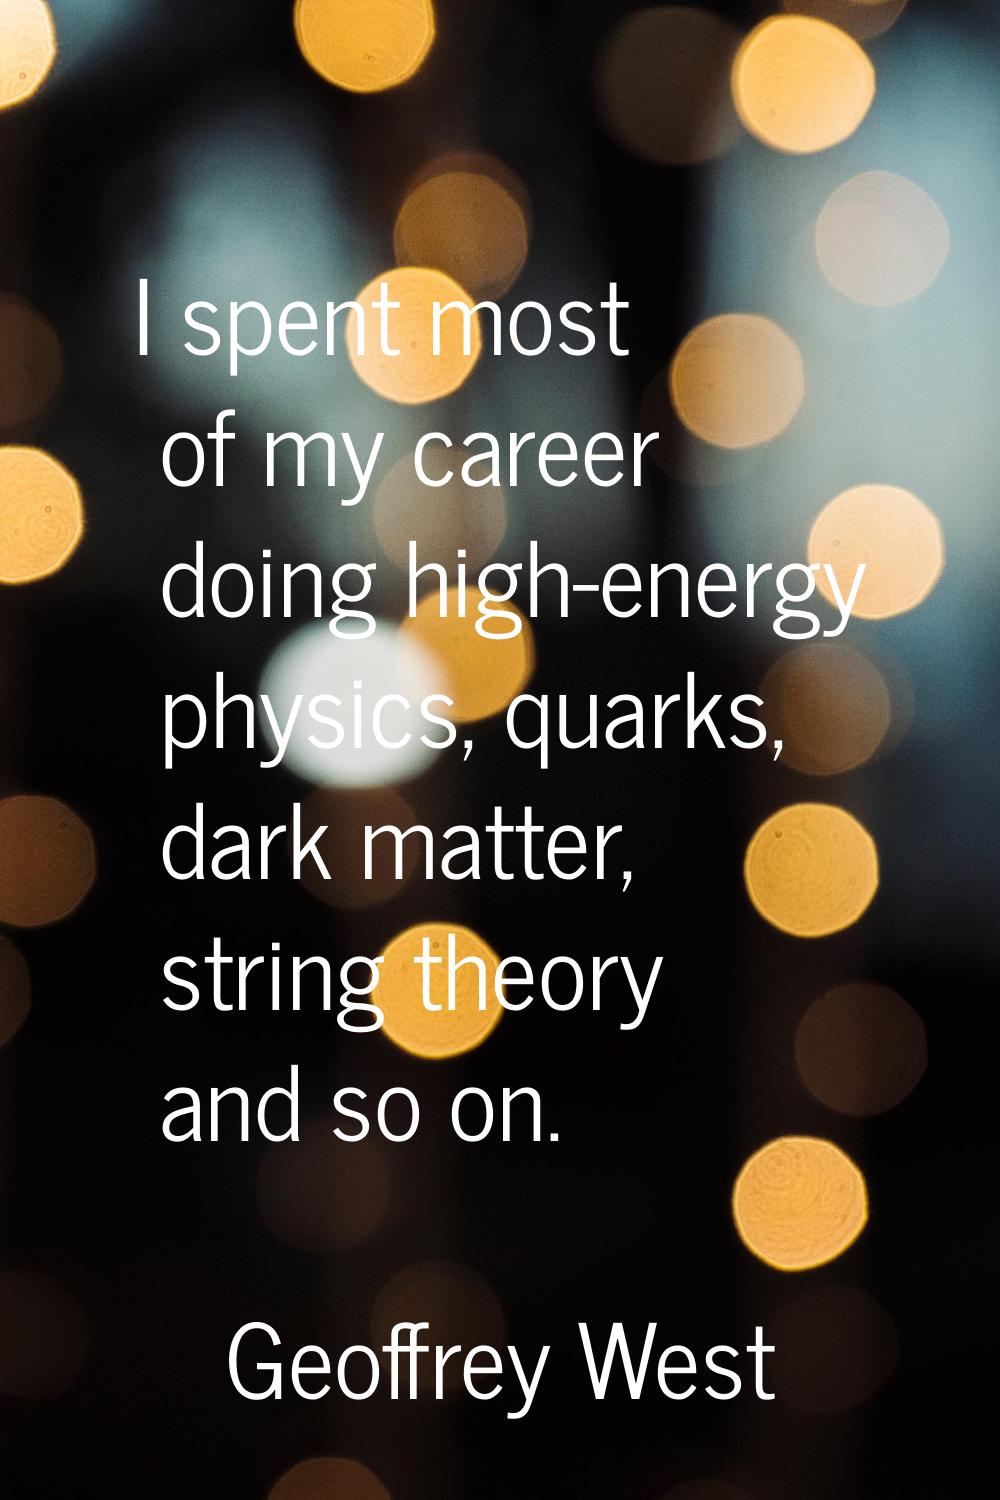 I spent most of my career doing high-energy physics, quarks, dark matter, string theory and so on.